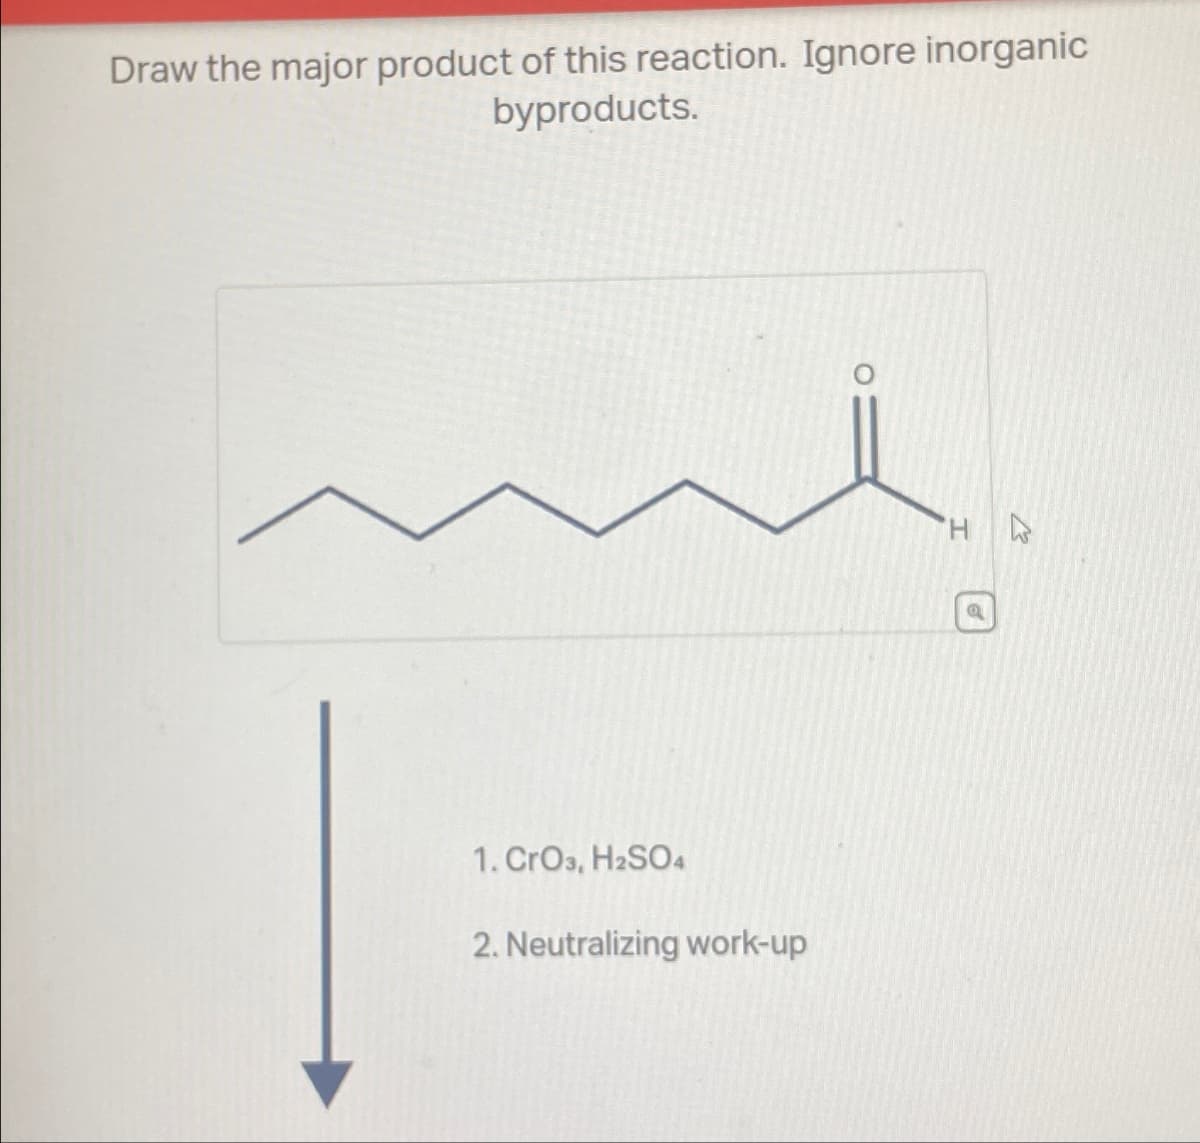 Draw the major product of this reaction. Ignore inorganic
byproducts.
1. CrO3, H2SO4
2. Neutralizing work-up